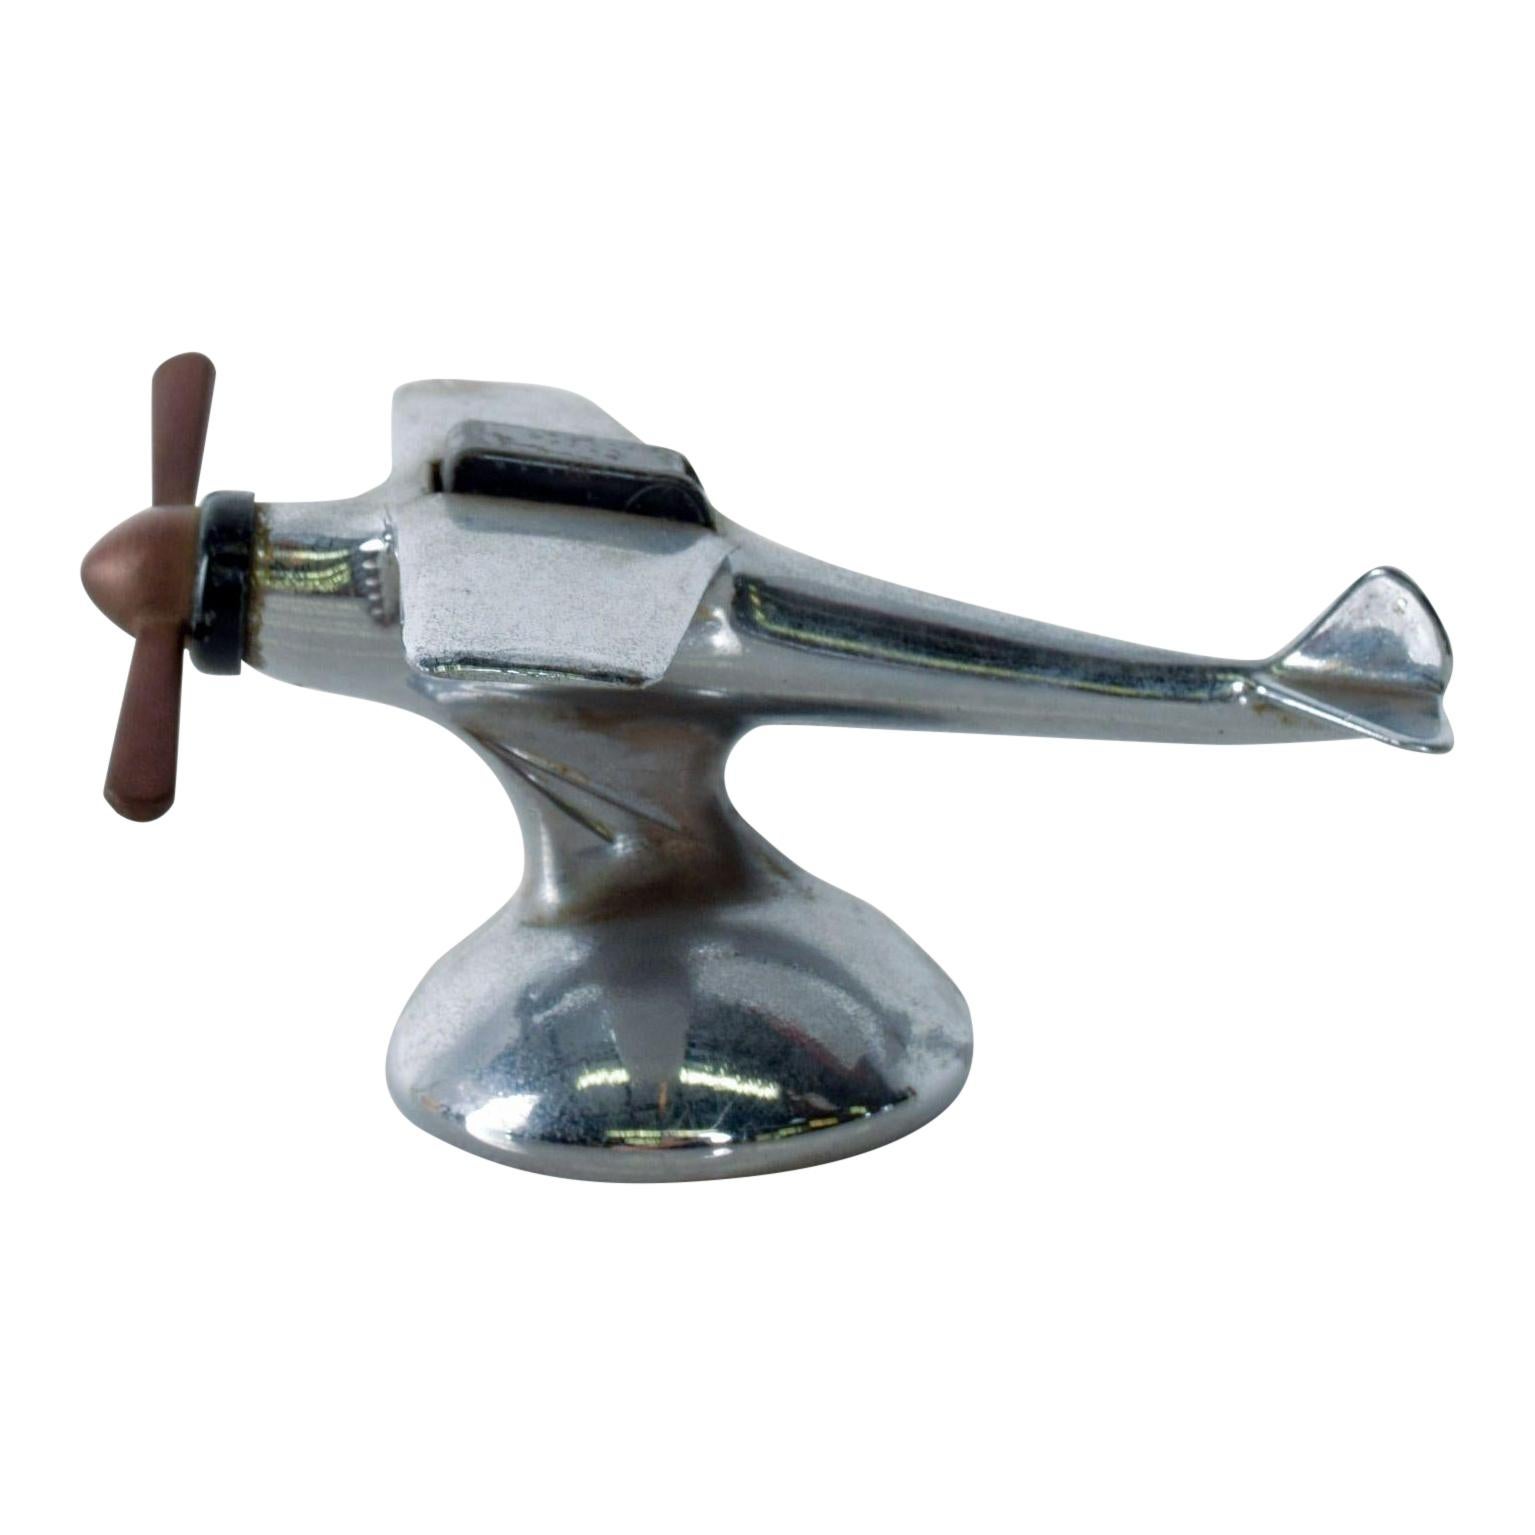 AMBIANIC presents
1930s Art Deco AIRFLAME Chrome Airplane Table Cigarette Lighter Hatch opens.
Chromed single propeller lighter black cockpit hatch. Turn the propeller to pop the hatch for use. Untested.
 3 H x 6 L x 5 W inches
Original unrestored